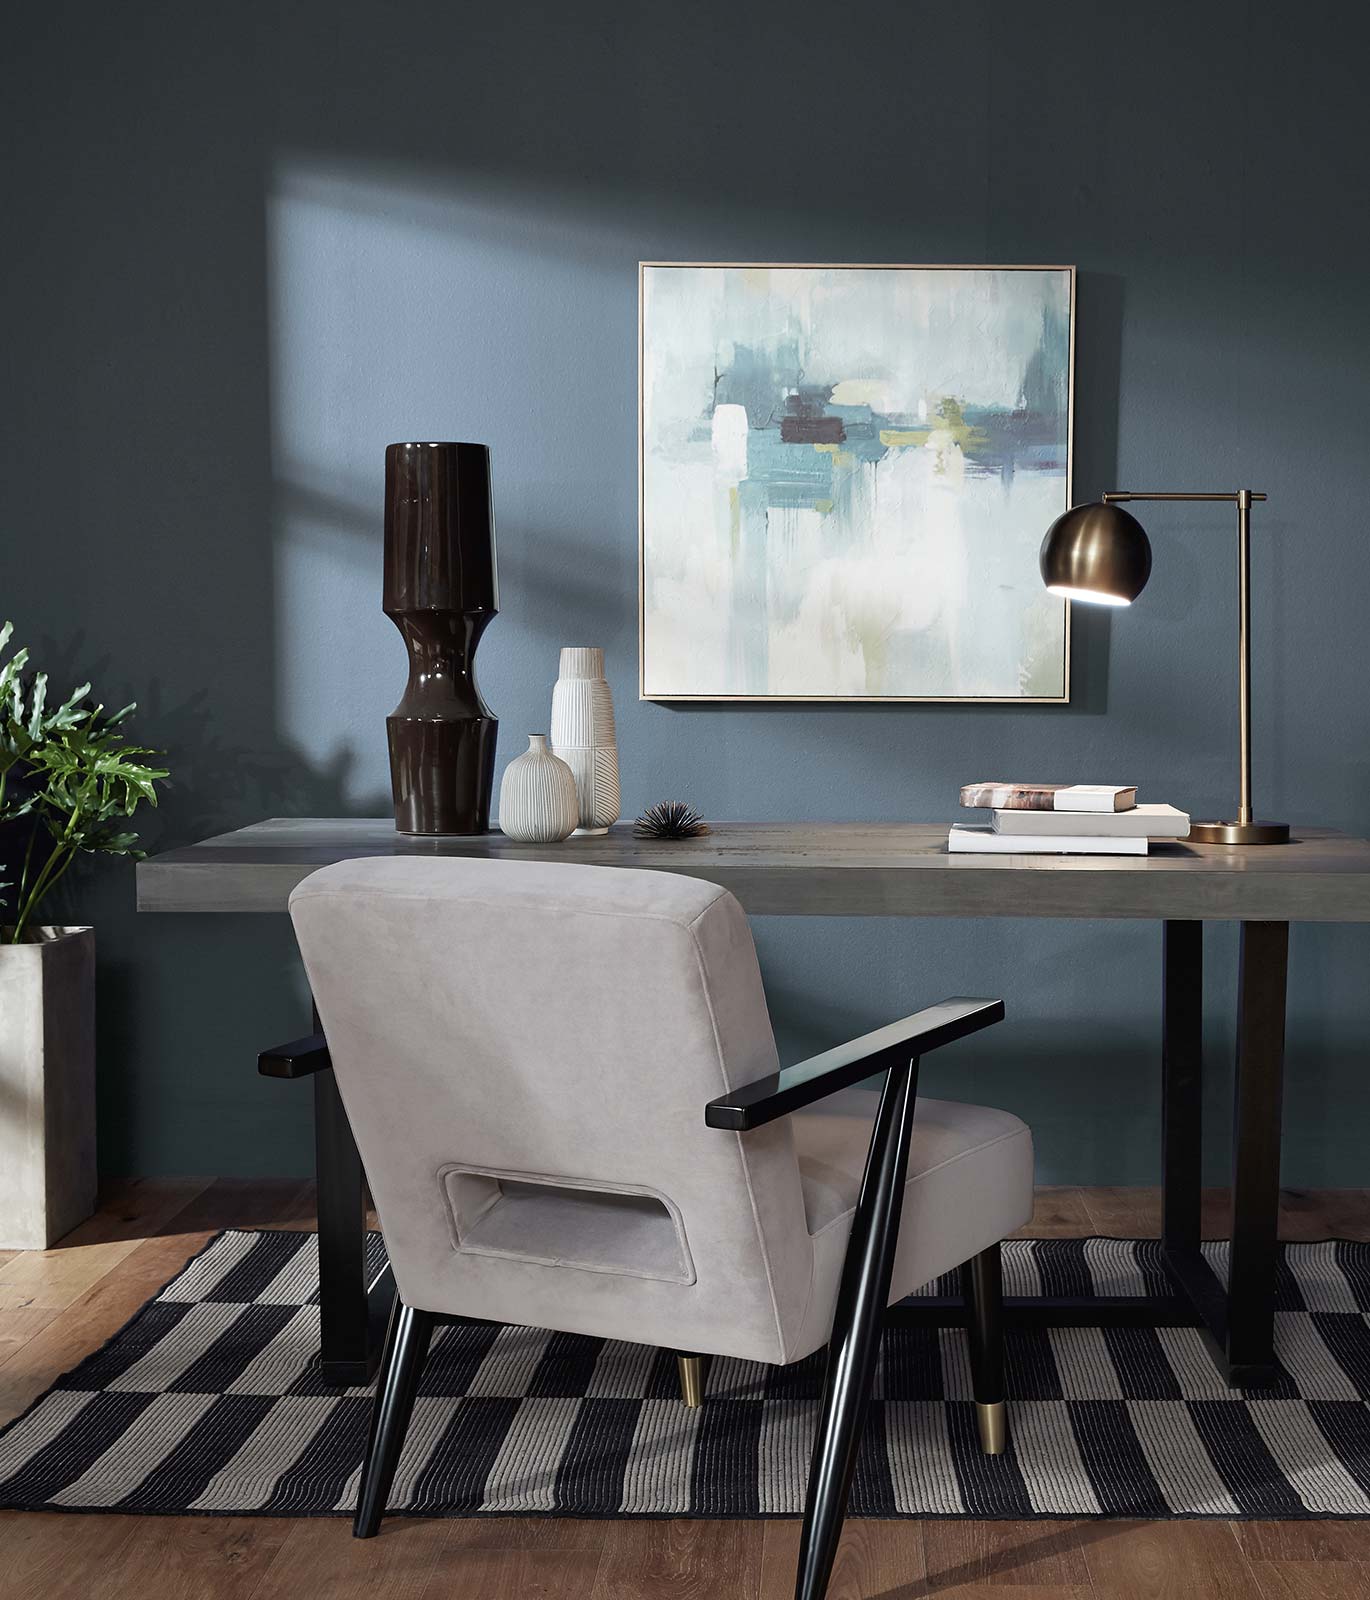 An office with a gray colored wood desk sitting against a wall painted in blue. There is a abstract painting hanging on the wall. The mood is relaxed and calm.